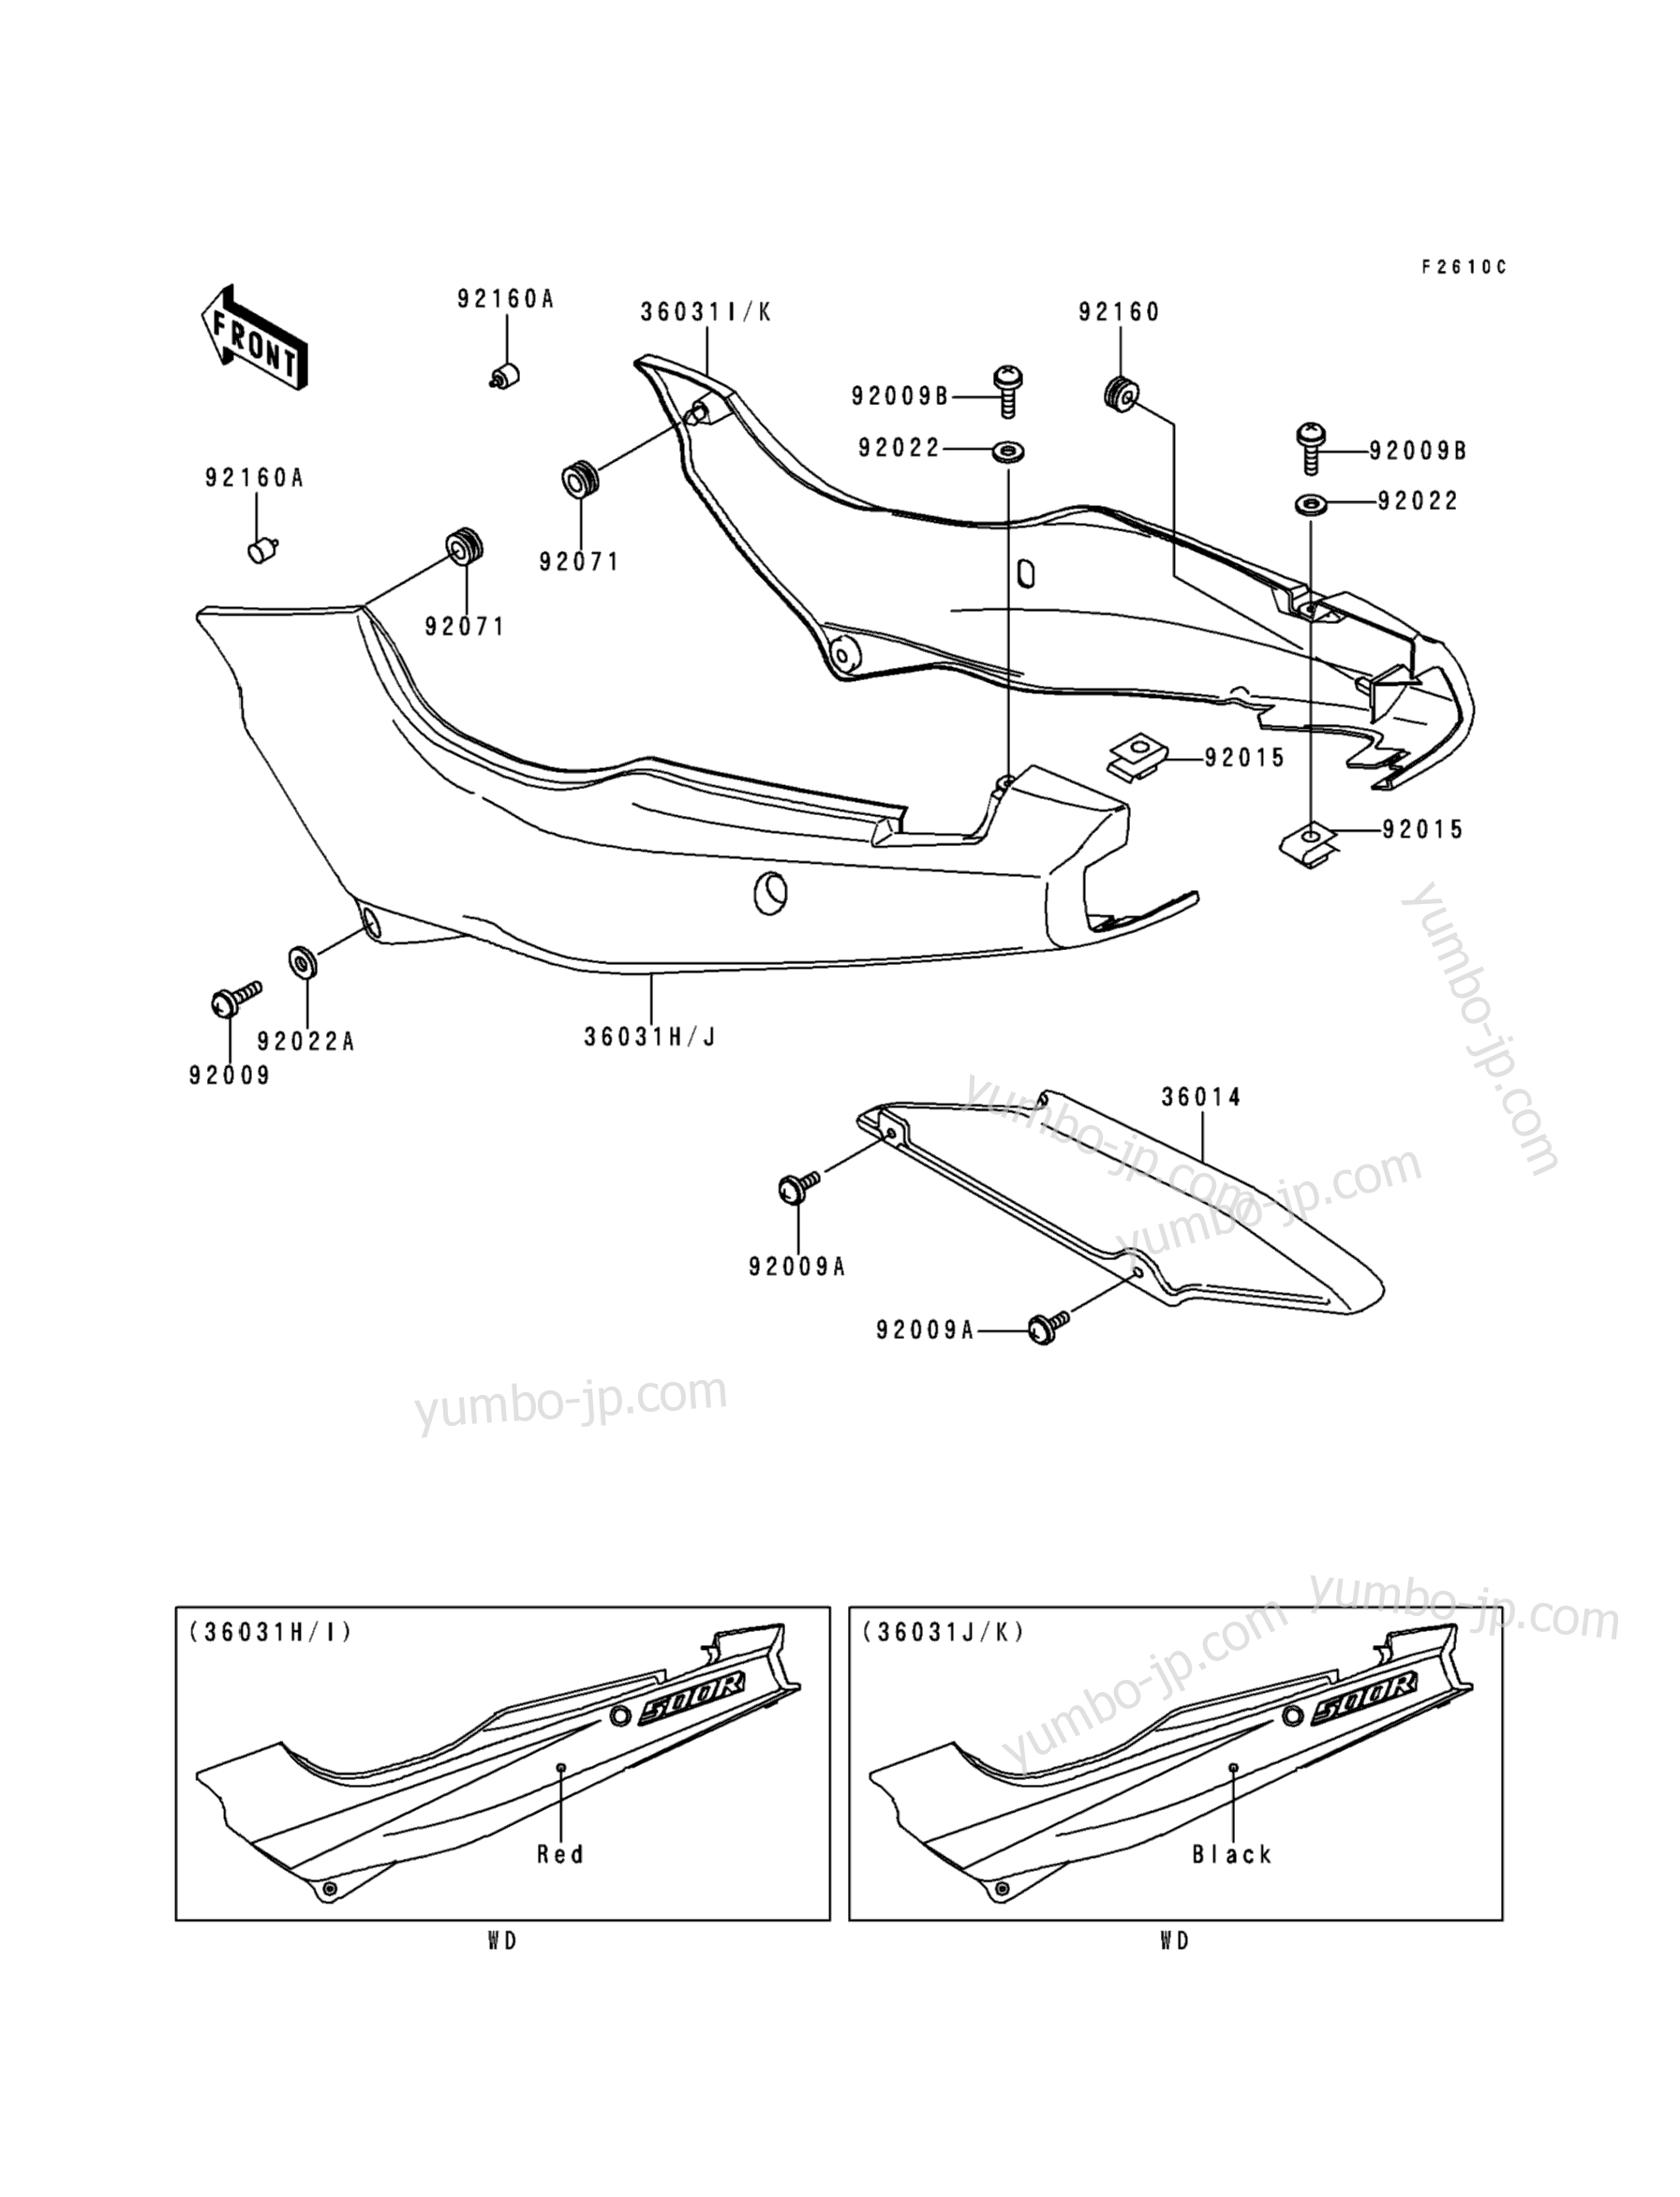 Side Covers/Chain Cover(EX500-D5) for motorcycles KAWASAKI NINJA 500 (EX500-D5) 1998 year